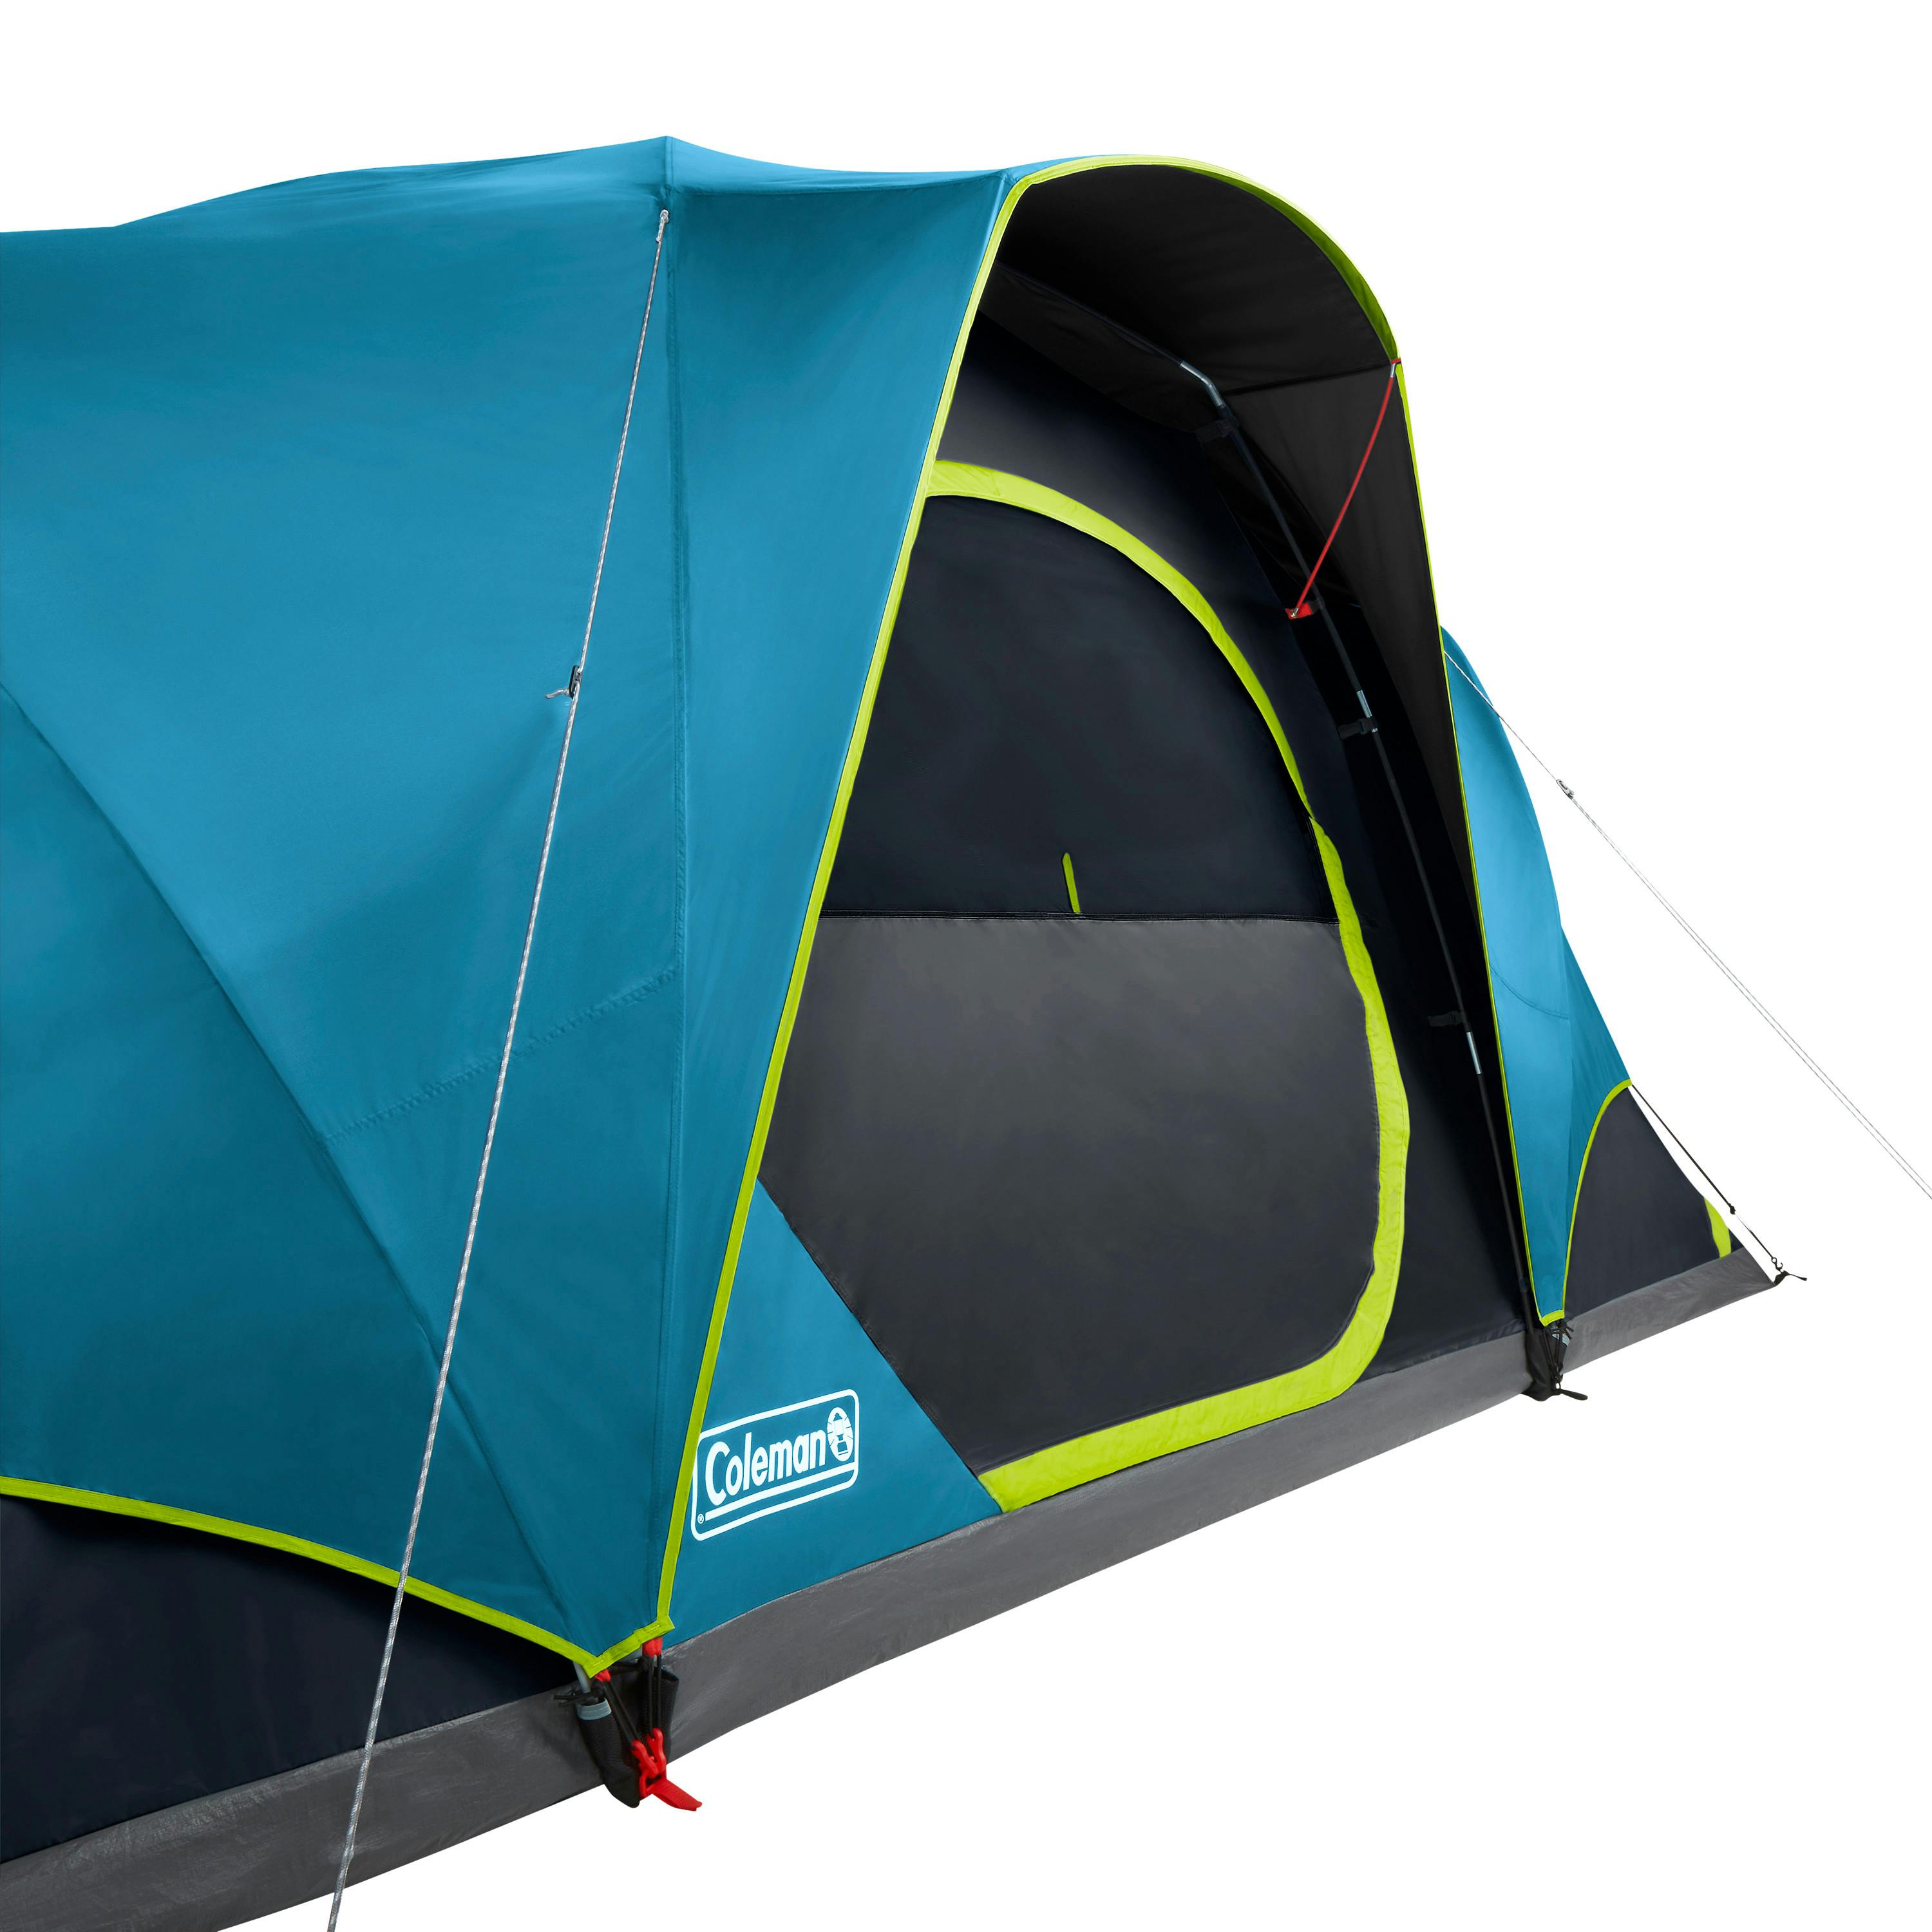 Coleman Skydome XL 10 Person Camping Tent with Dark Room Technology